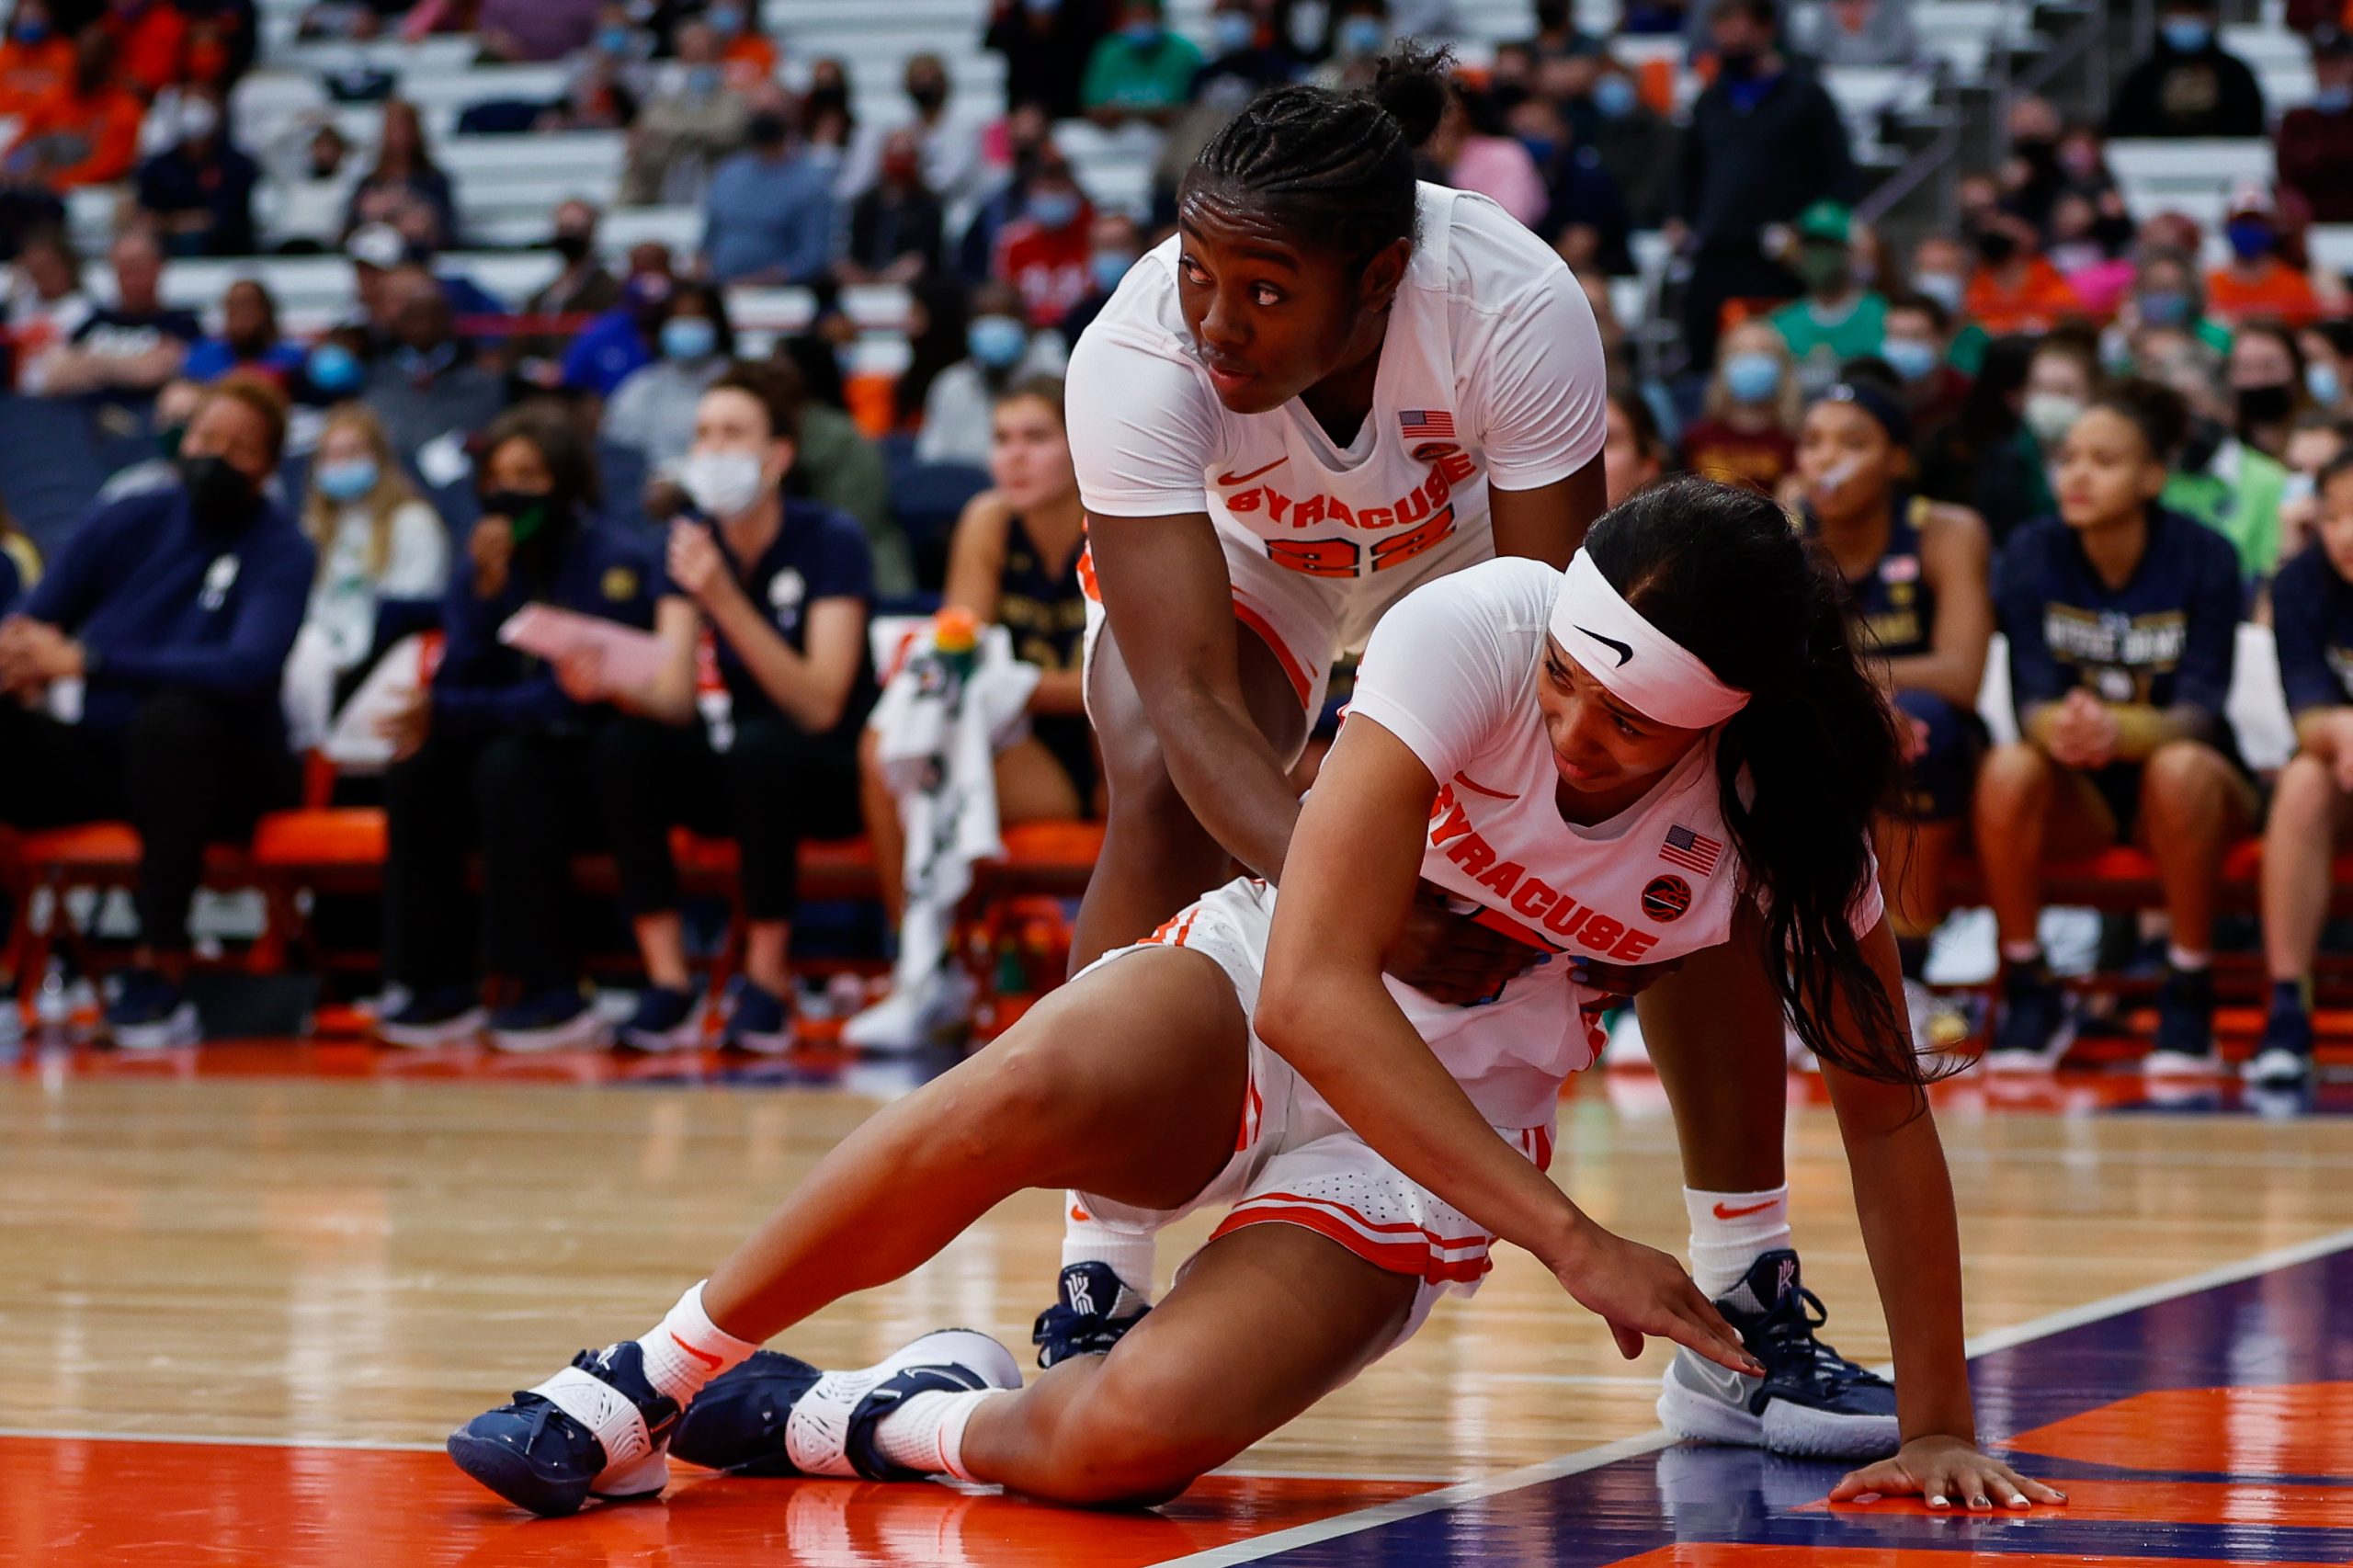 Syracuse's Eboni Walker helps up Alaina Rice during a Women's Basketball game against Notre Dame at the Carrier Dome on November 14, 2021.